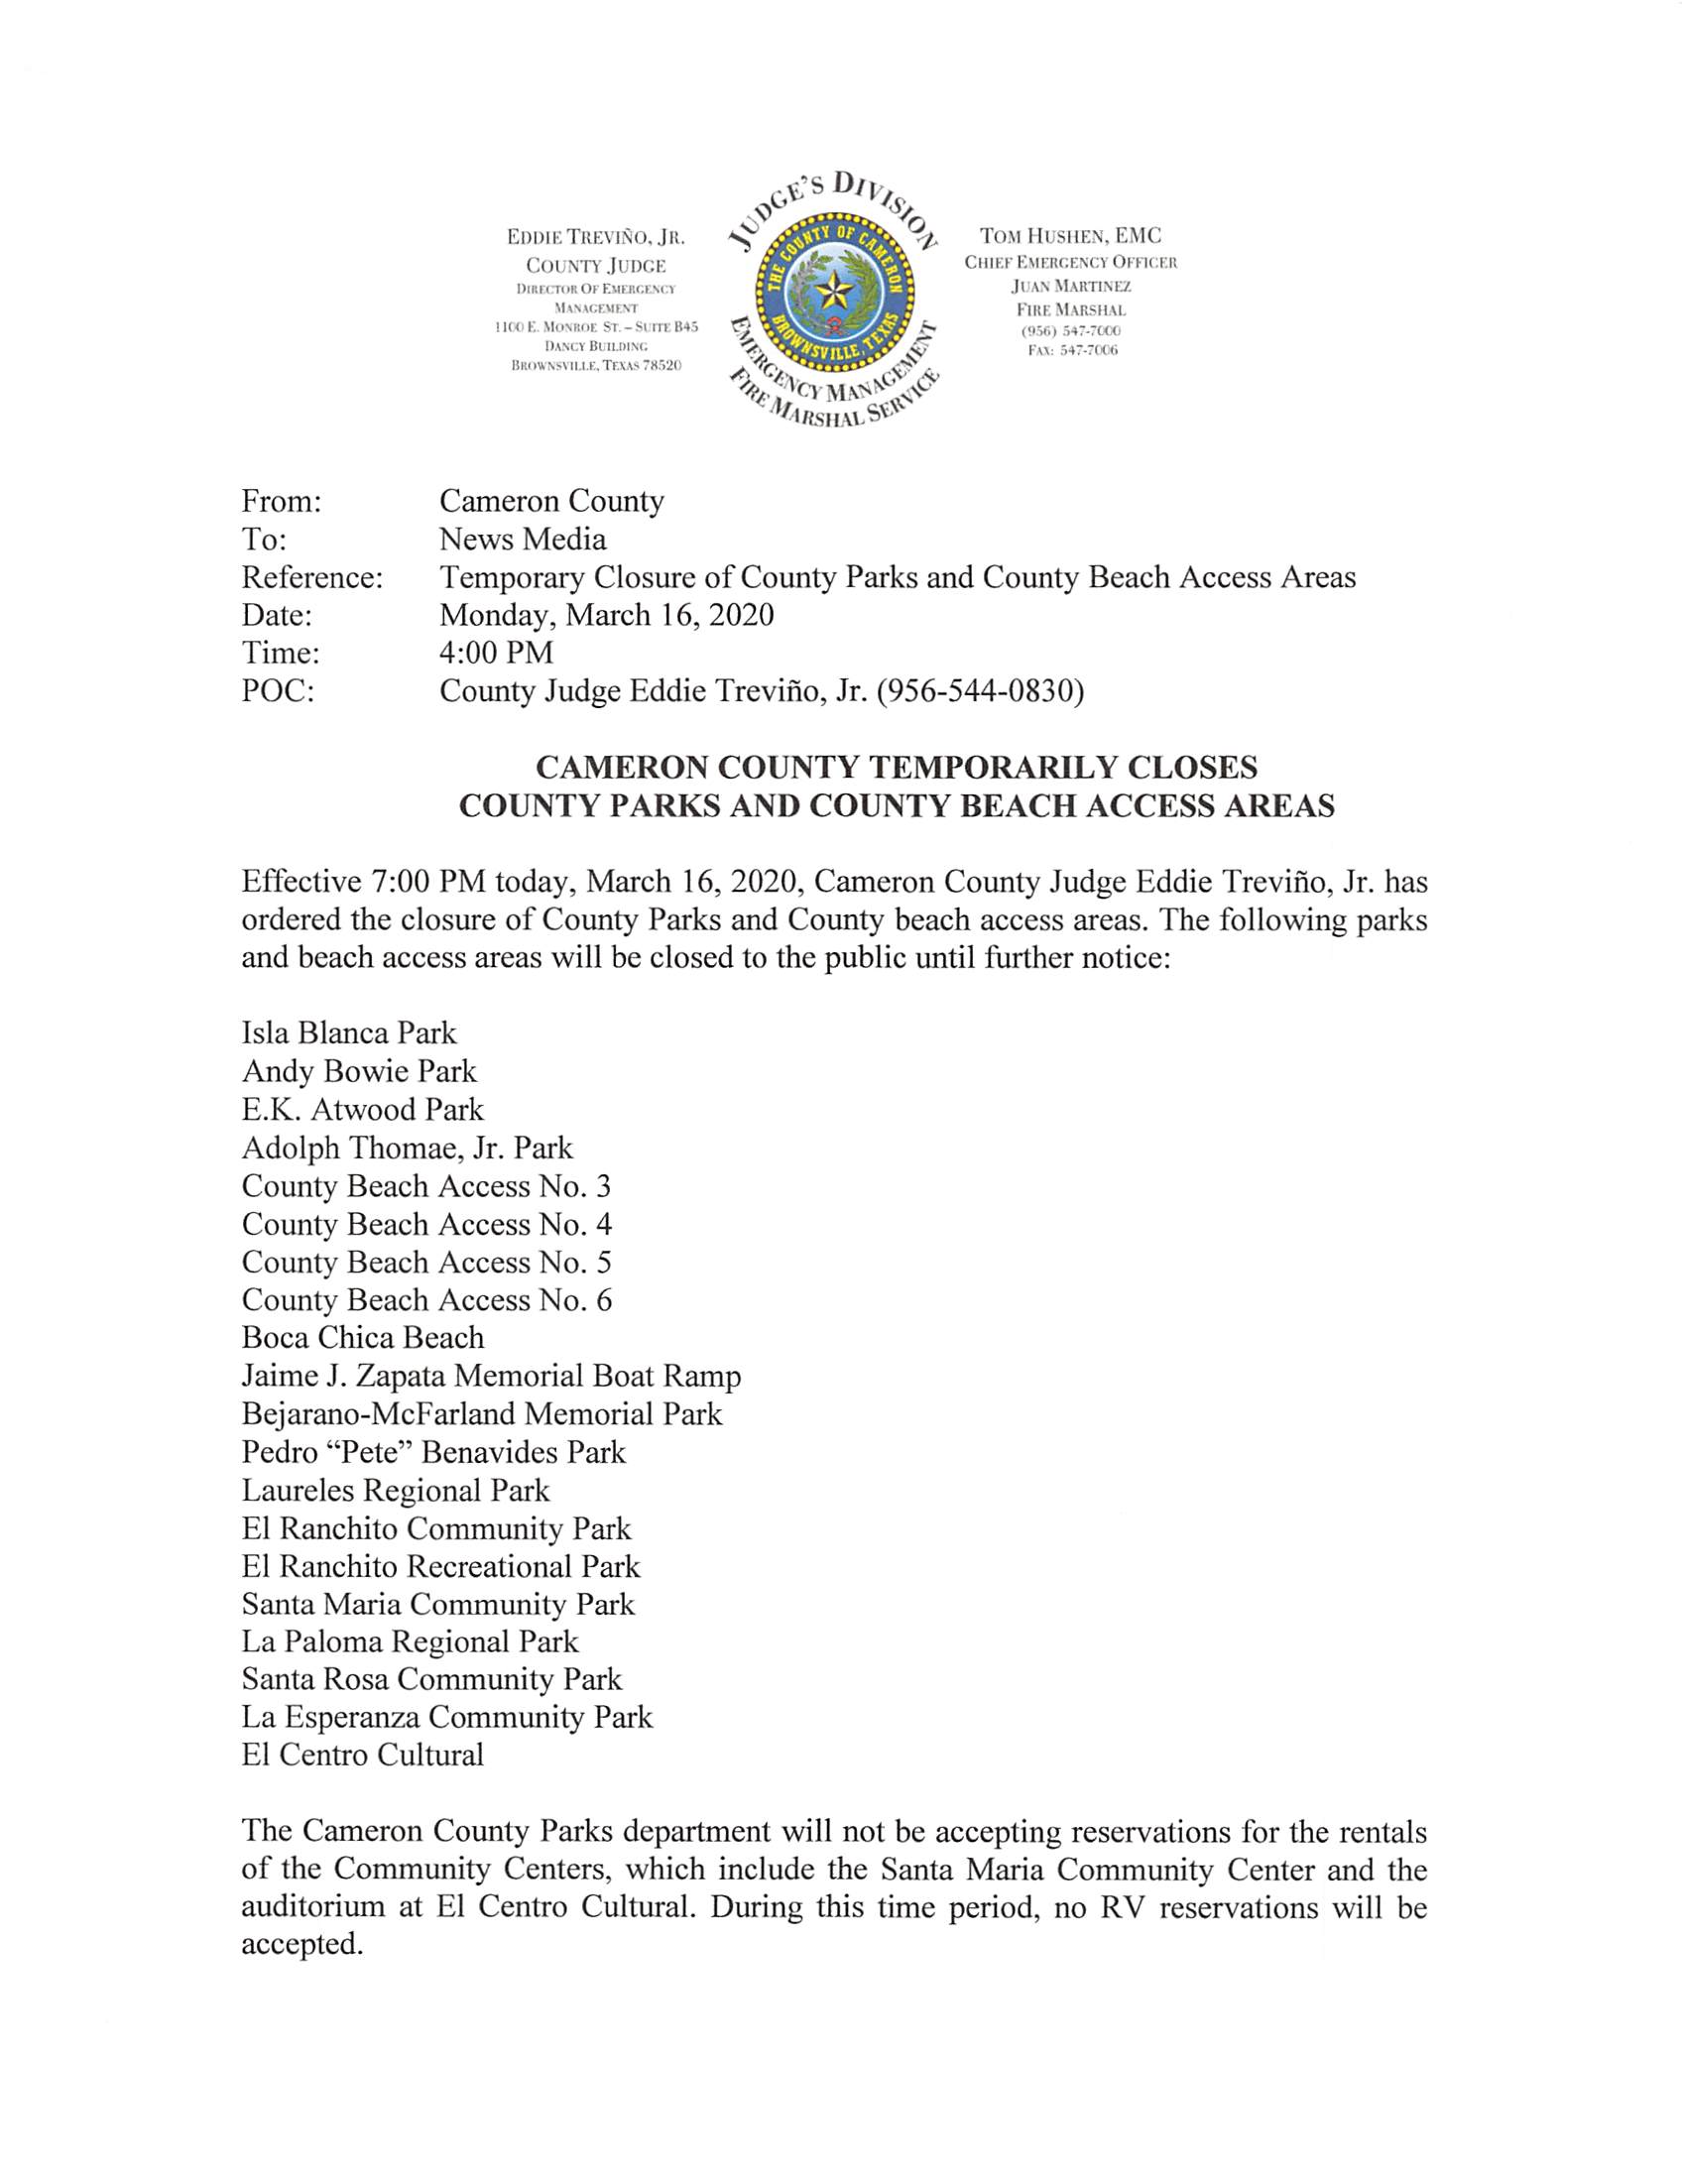 2020 03 16 Press Release County Temporarily Closes County Parks And County Beach Access Areas Page 1